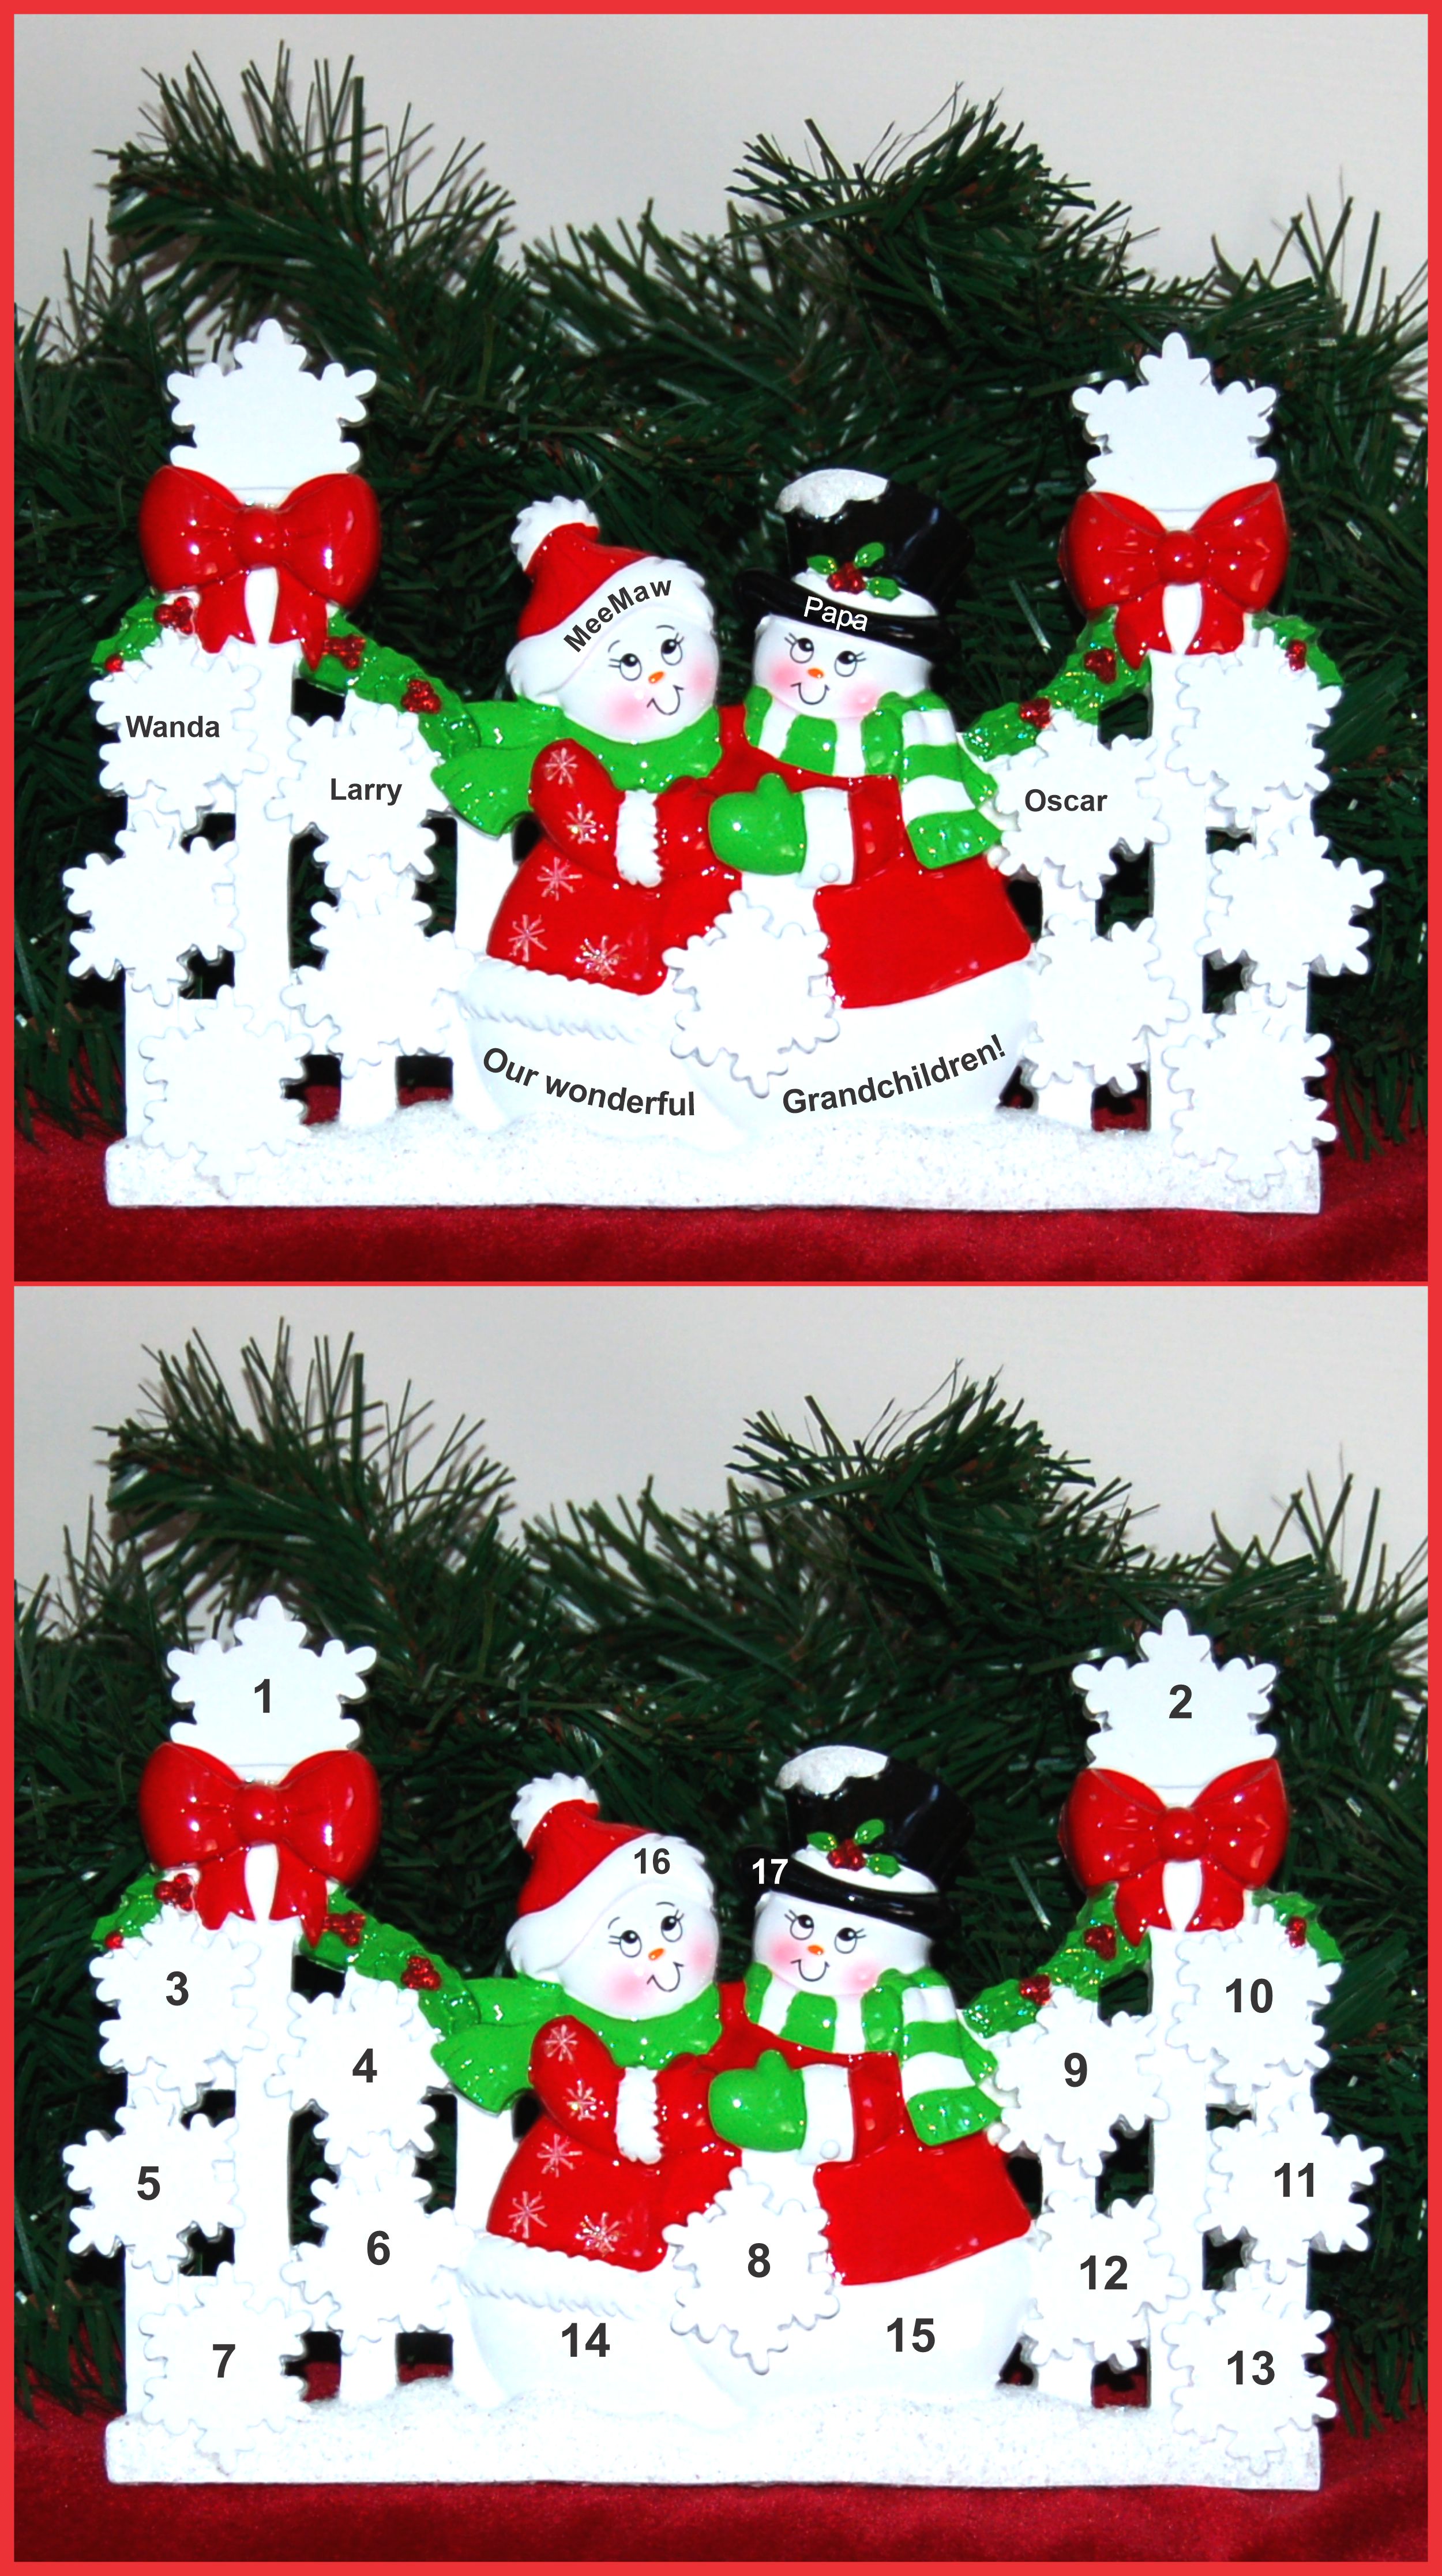 Personalized Grandparents Tabletop Christmas Decoration Snowflakes for 3 Grandchildren by Russell Rhodes